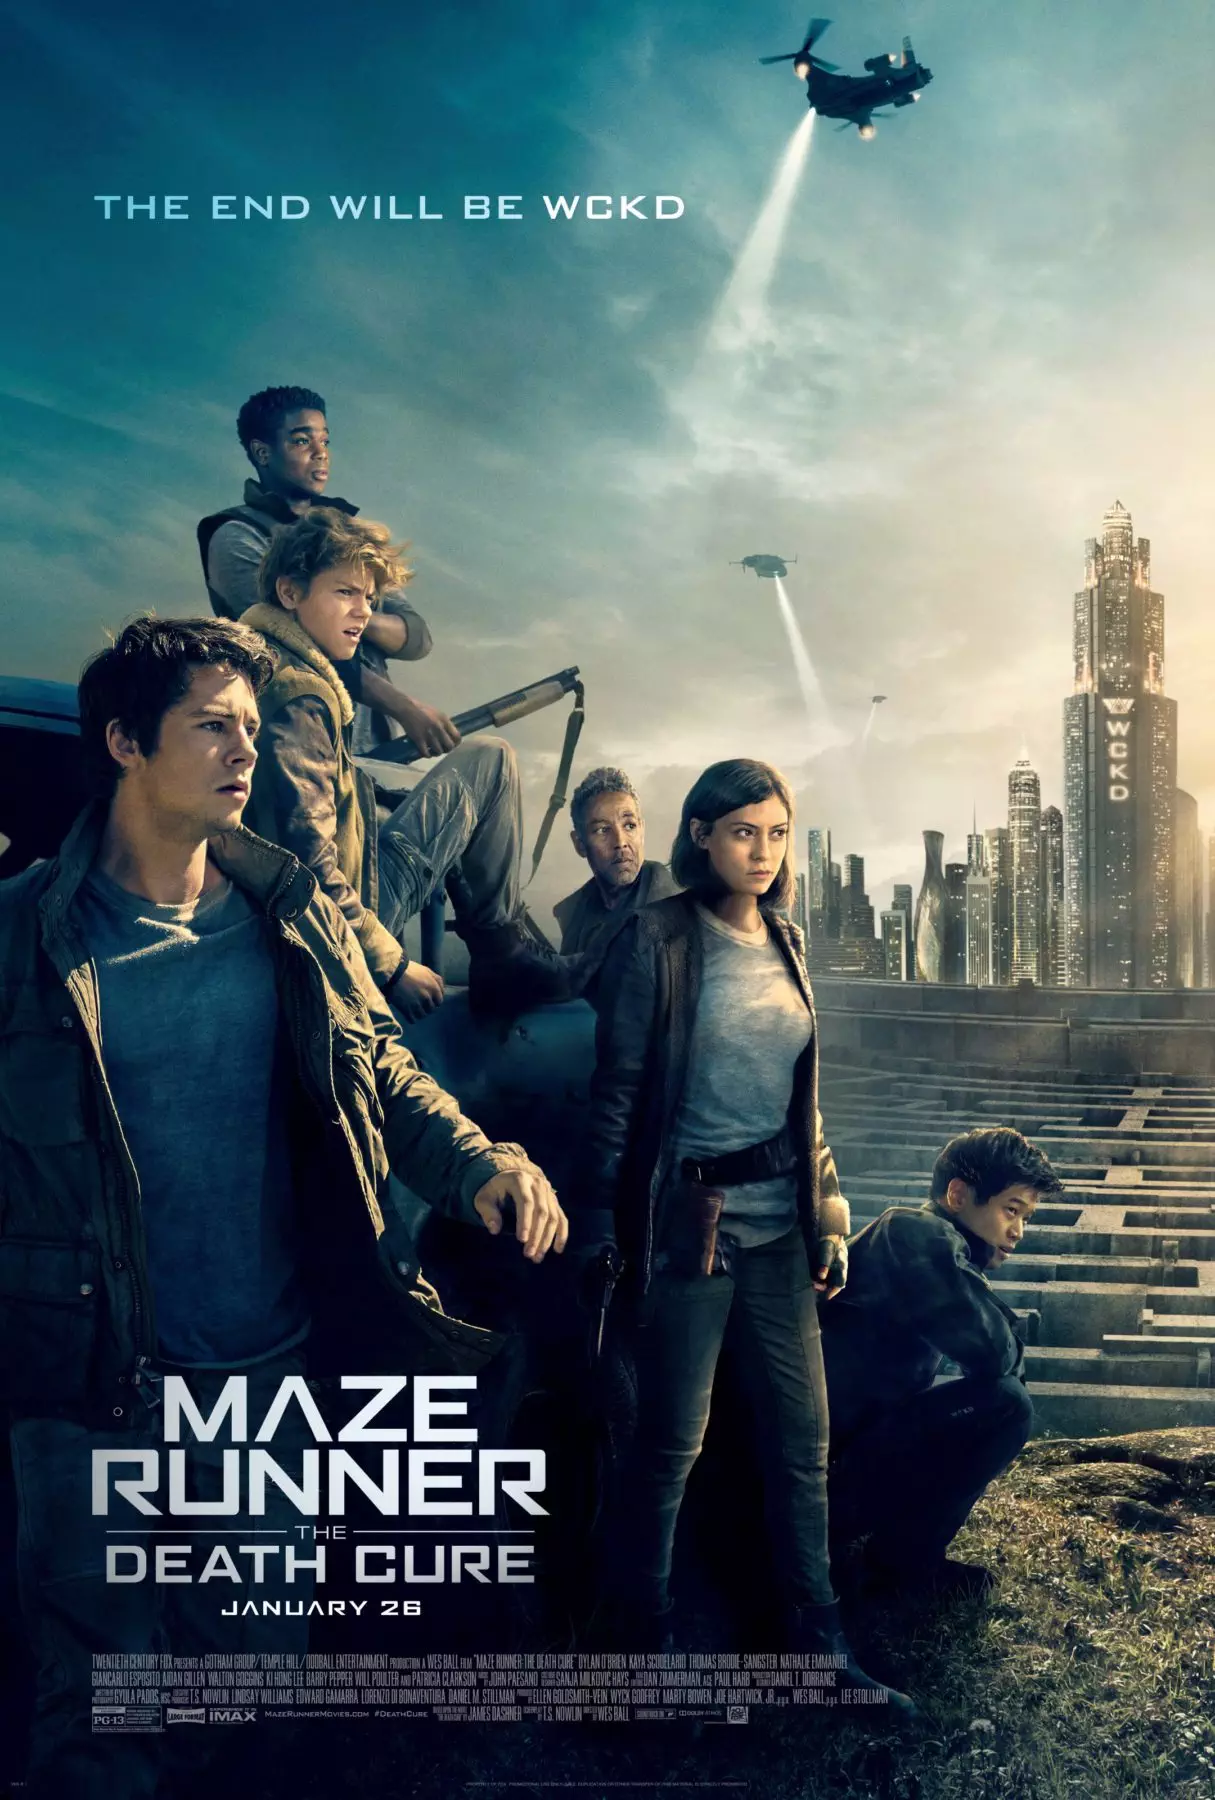 Ending of intriguing 'Maze Runner' is a puzzle